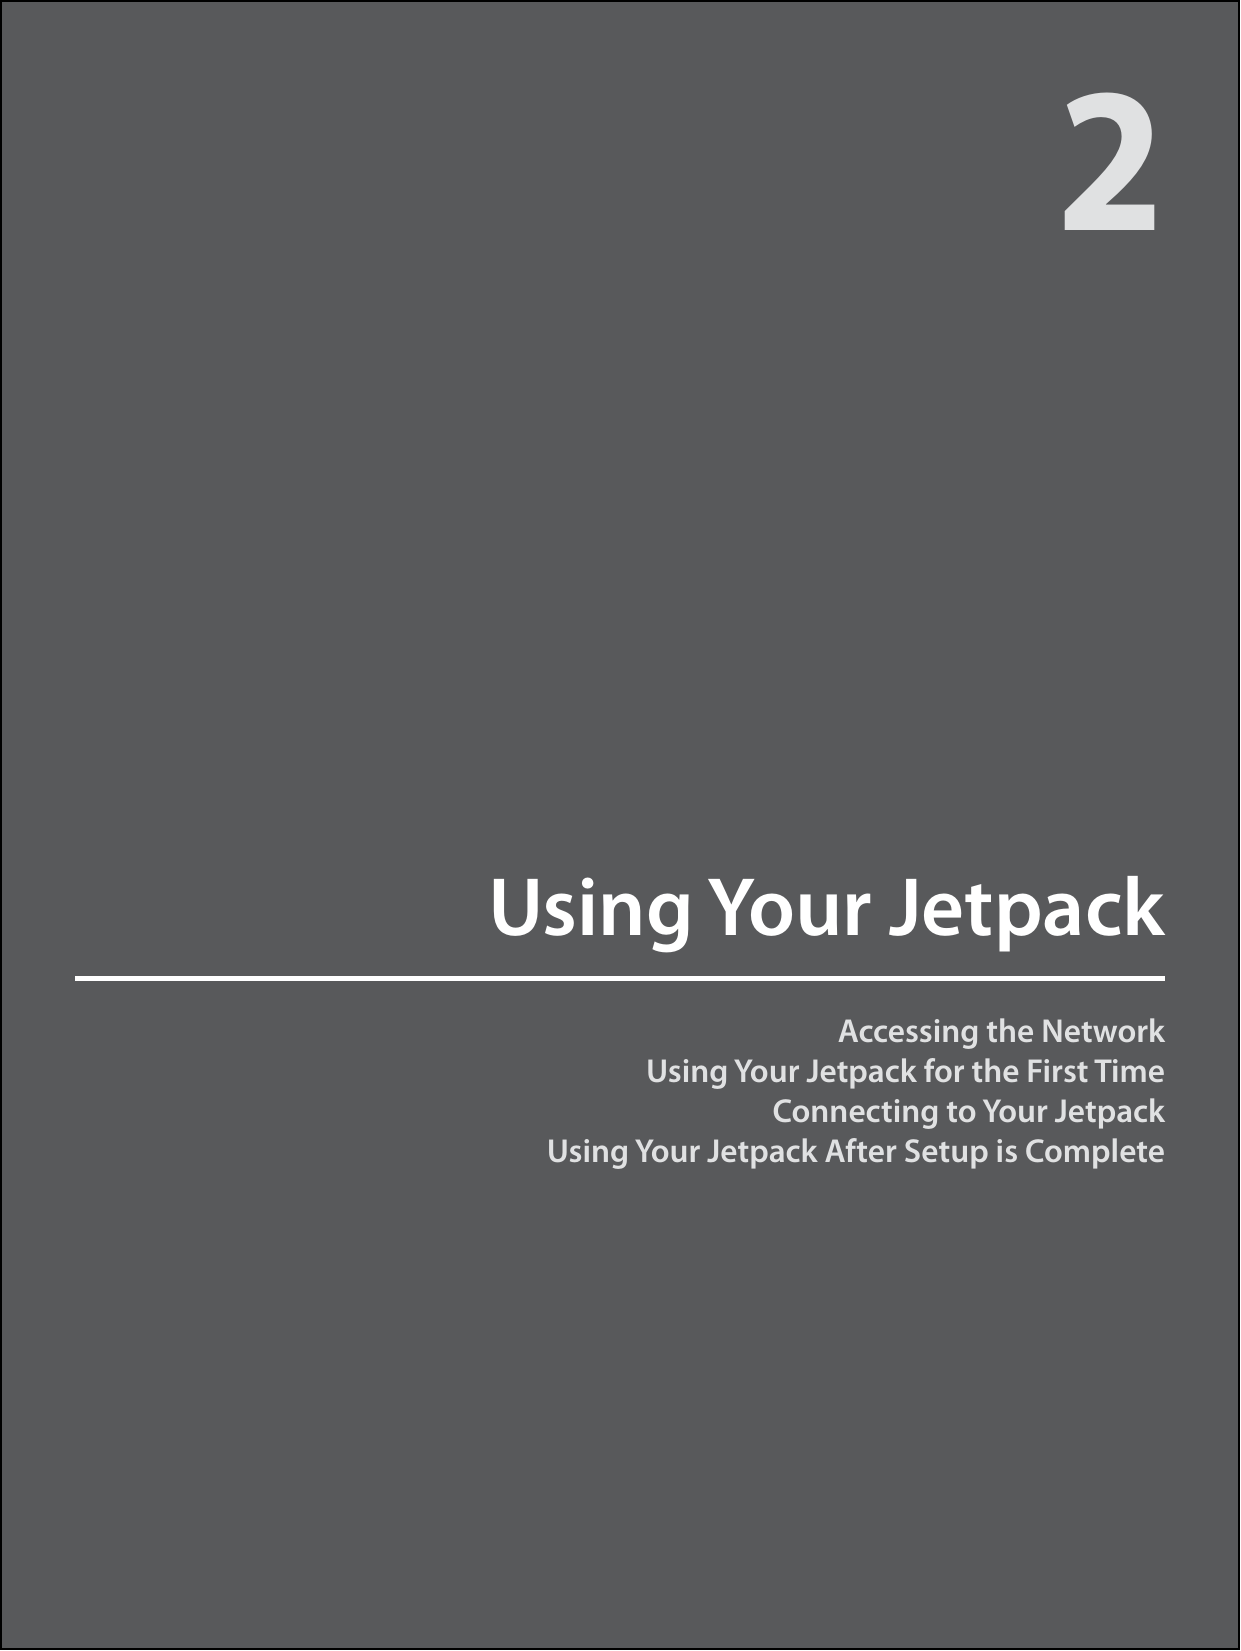 Accessing the NetworkUsing Your Jetpack for the First TimeConnecting to Your JetpackUsing Your Jetpack After Setup is CompleteUsing Your Jetpack2